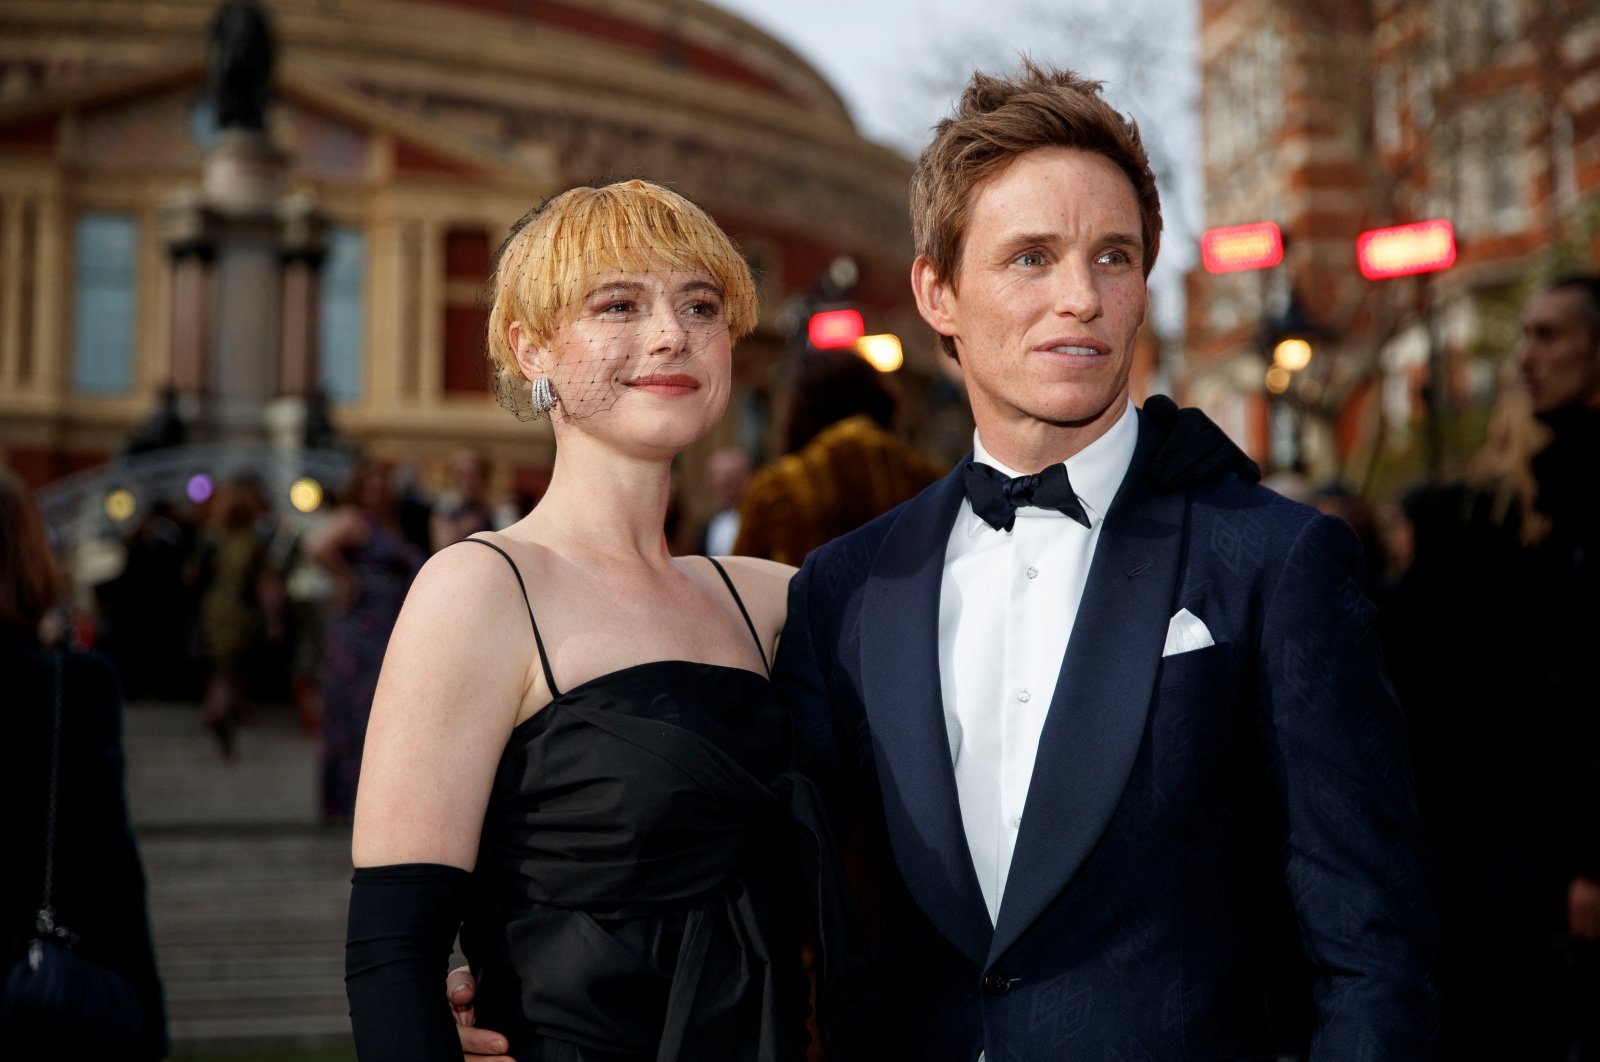 Actors Jessie Buckley and Eddie Redmayne from &quot;Cabaret&quot; arrive at the Olivier Awards in the Royal Albert Hall in London, Britain, April 10, 2022. (Reuters Photo)